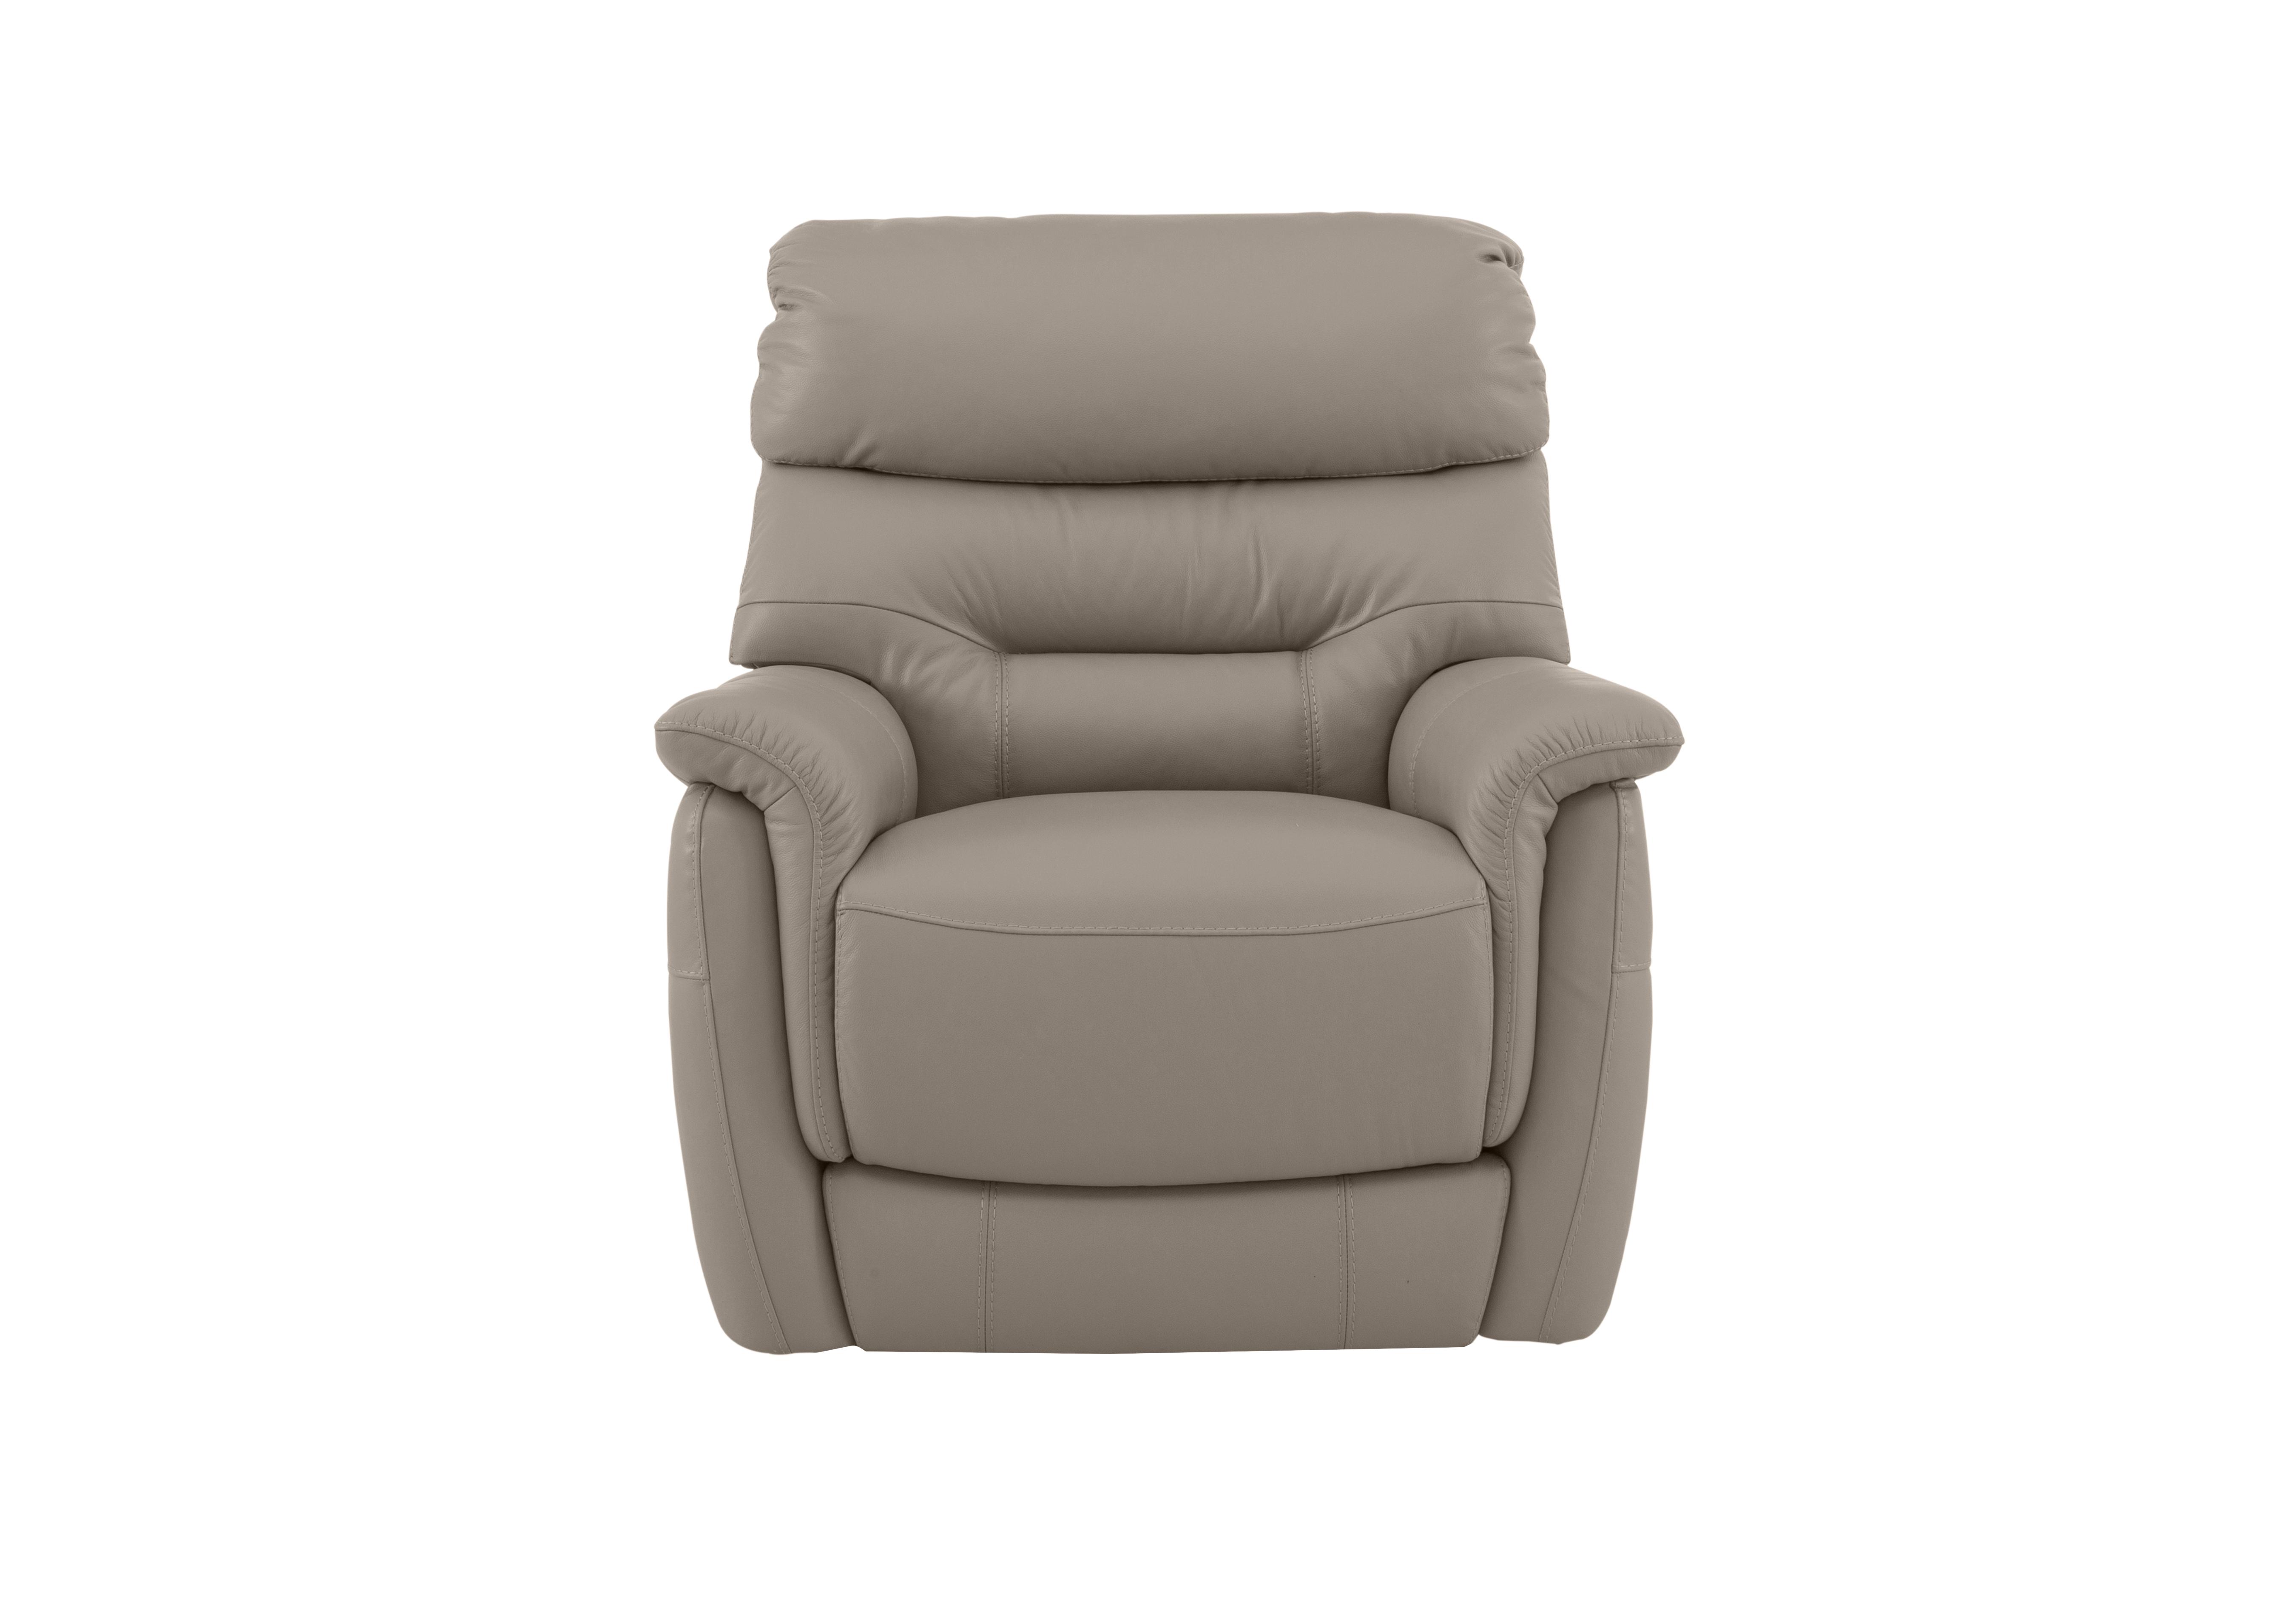 Chicago Leather Armchair in An-946b Silver Grey on Furniture Village